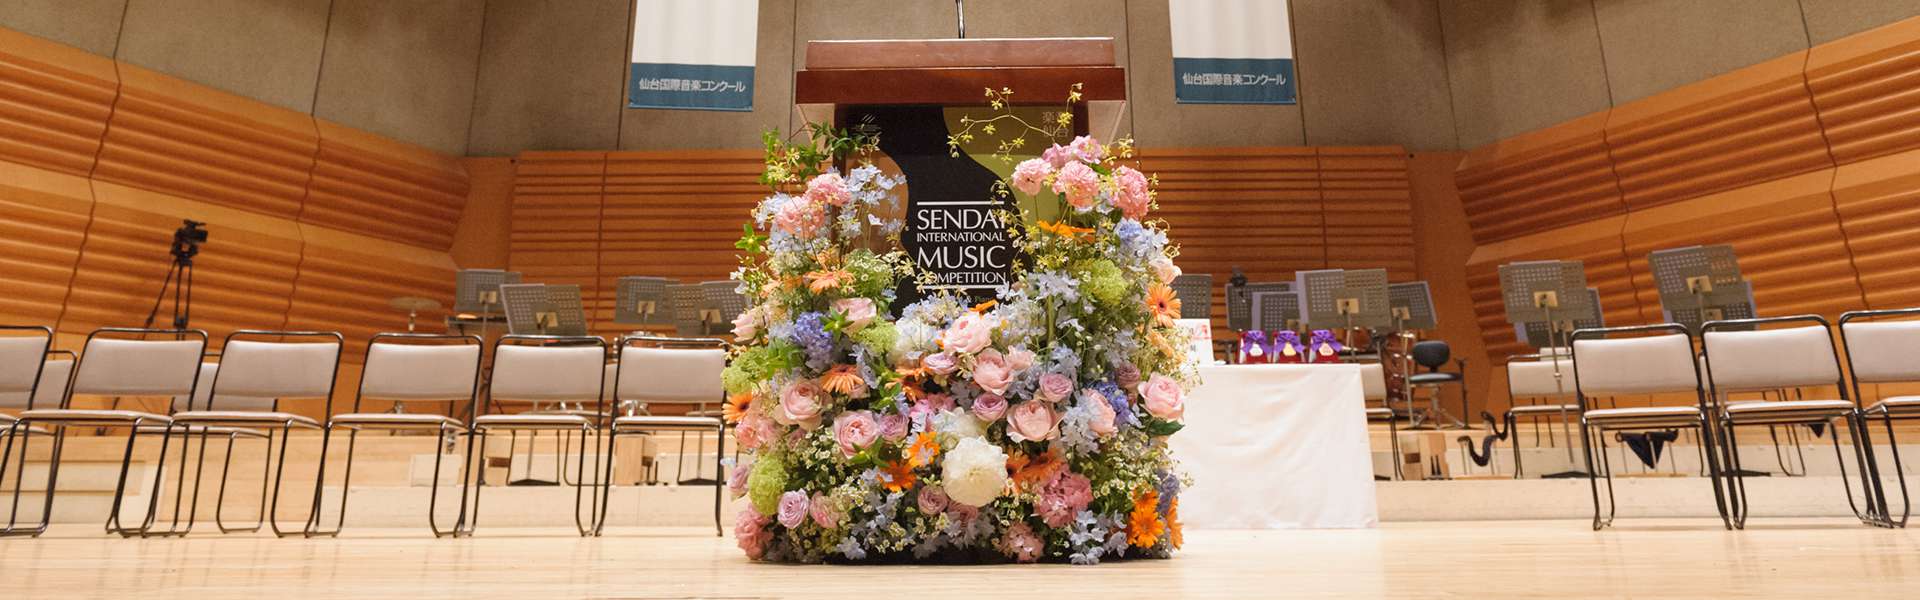 Website for the Contestants has been created by the volunteer members. | Sendai International Music Competition Official Website